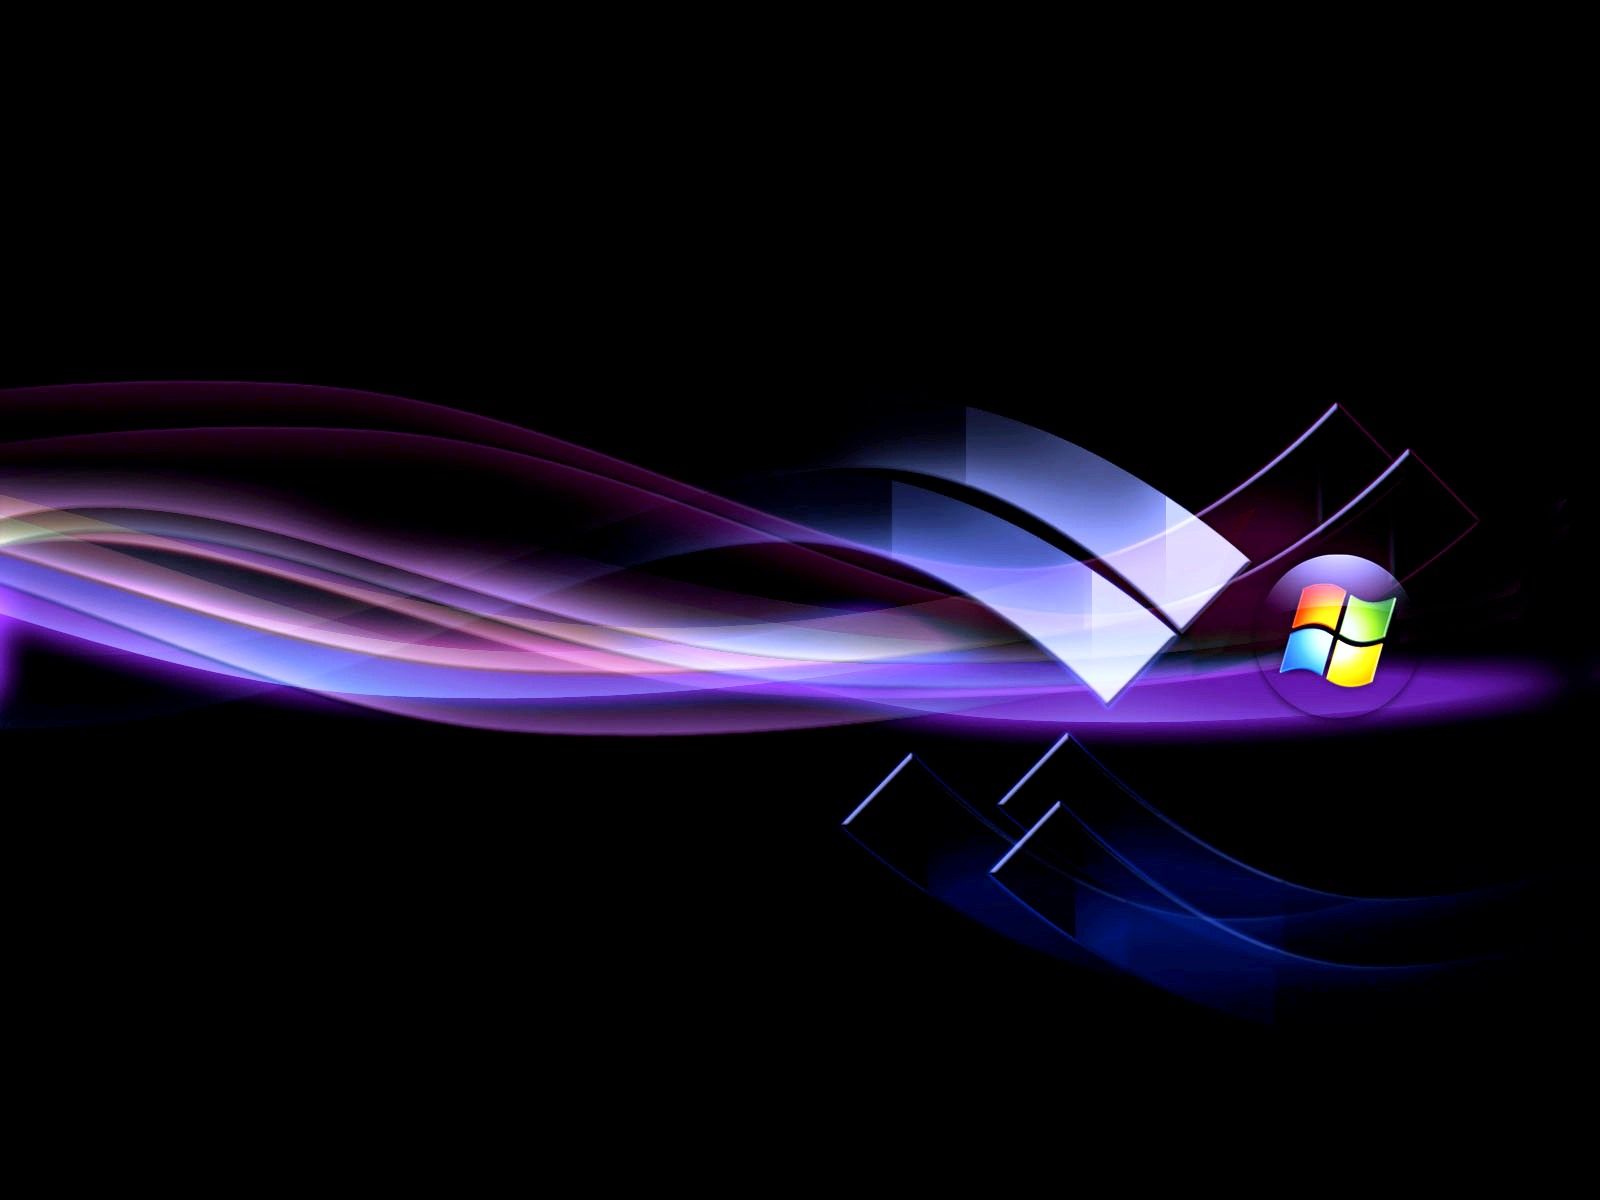 Animated Desktop Wallpaper Windows 7 Free Animated by Free